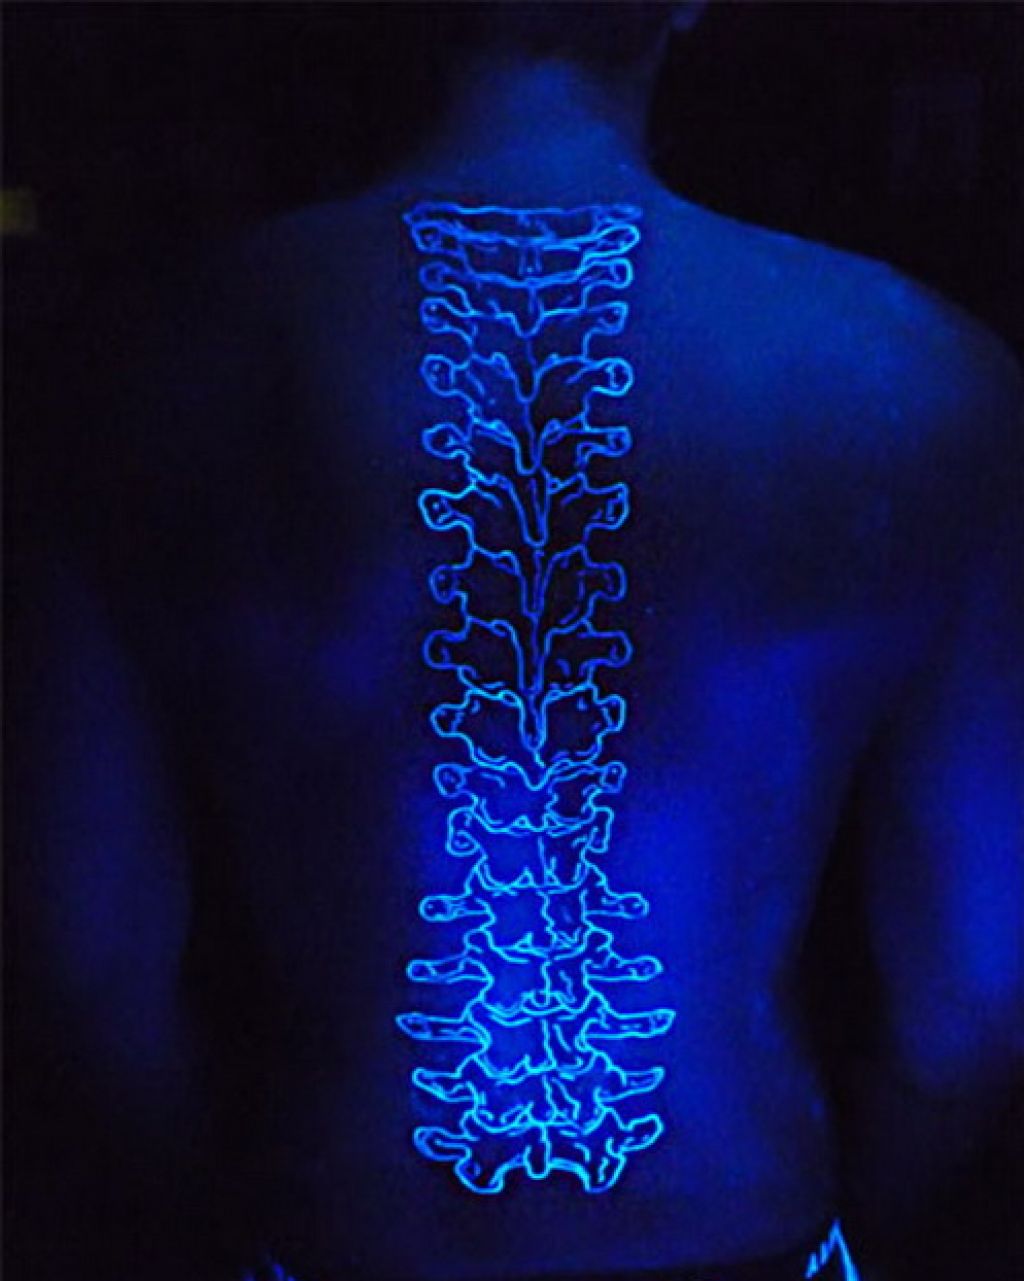 UV tattoos are created with ink that is completely invisible in normal daylight but glows brightly under ultraviolet light.